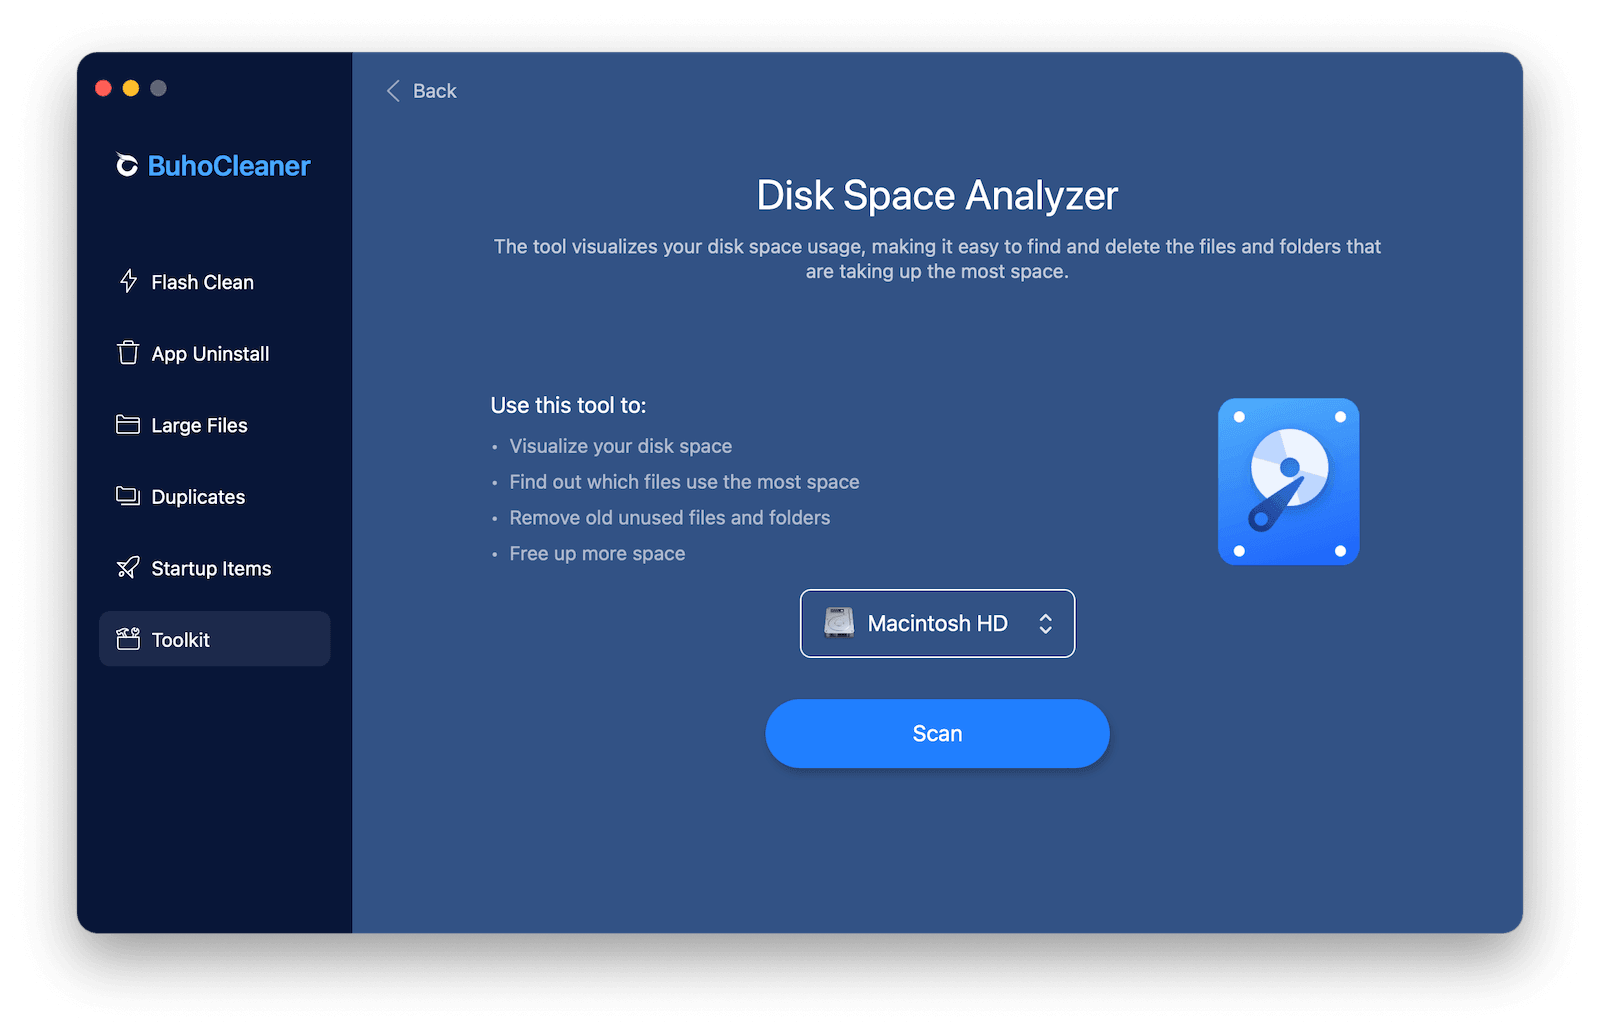 BuhoCleaner's Disk Space Analyzer